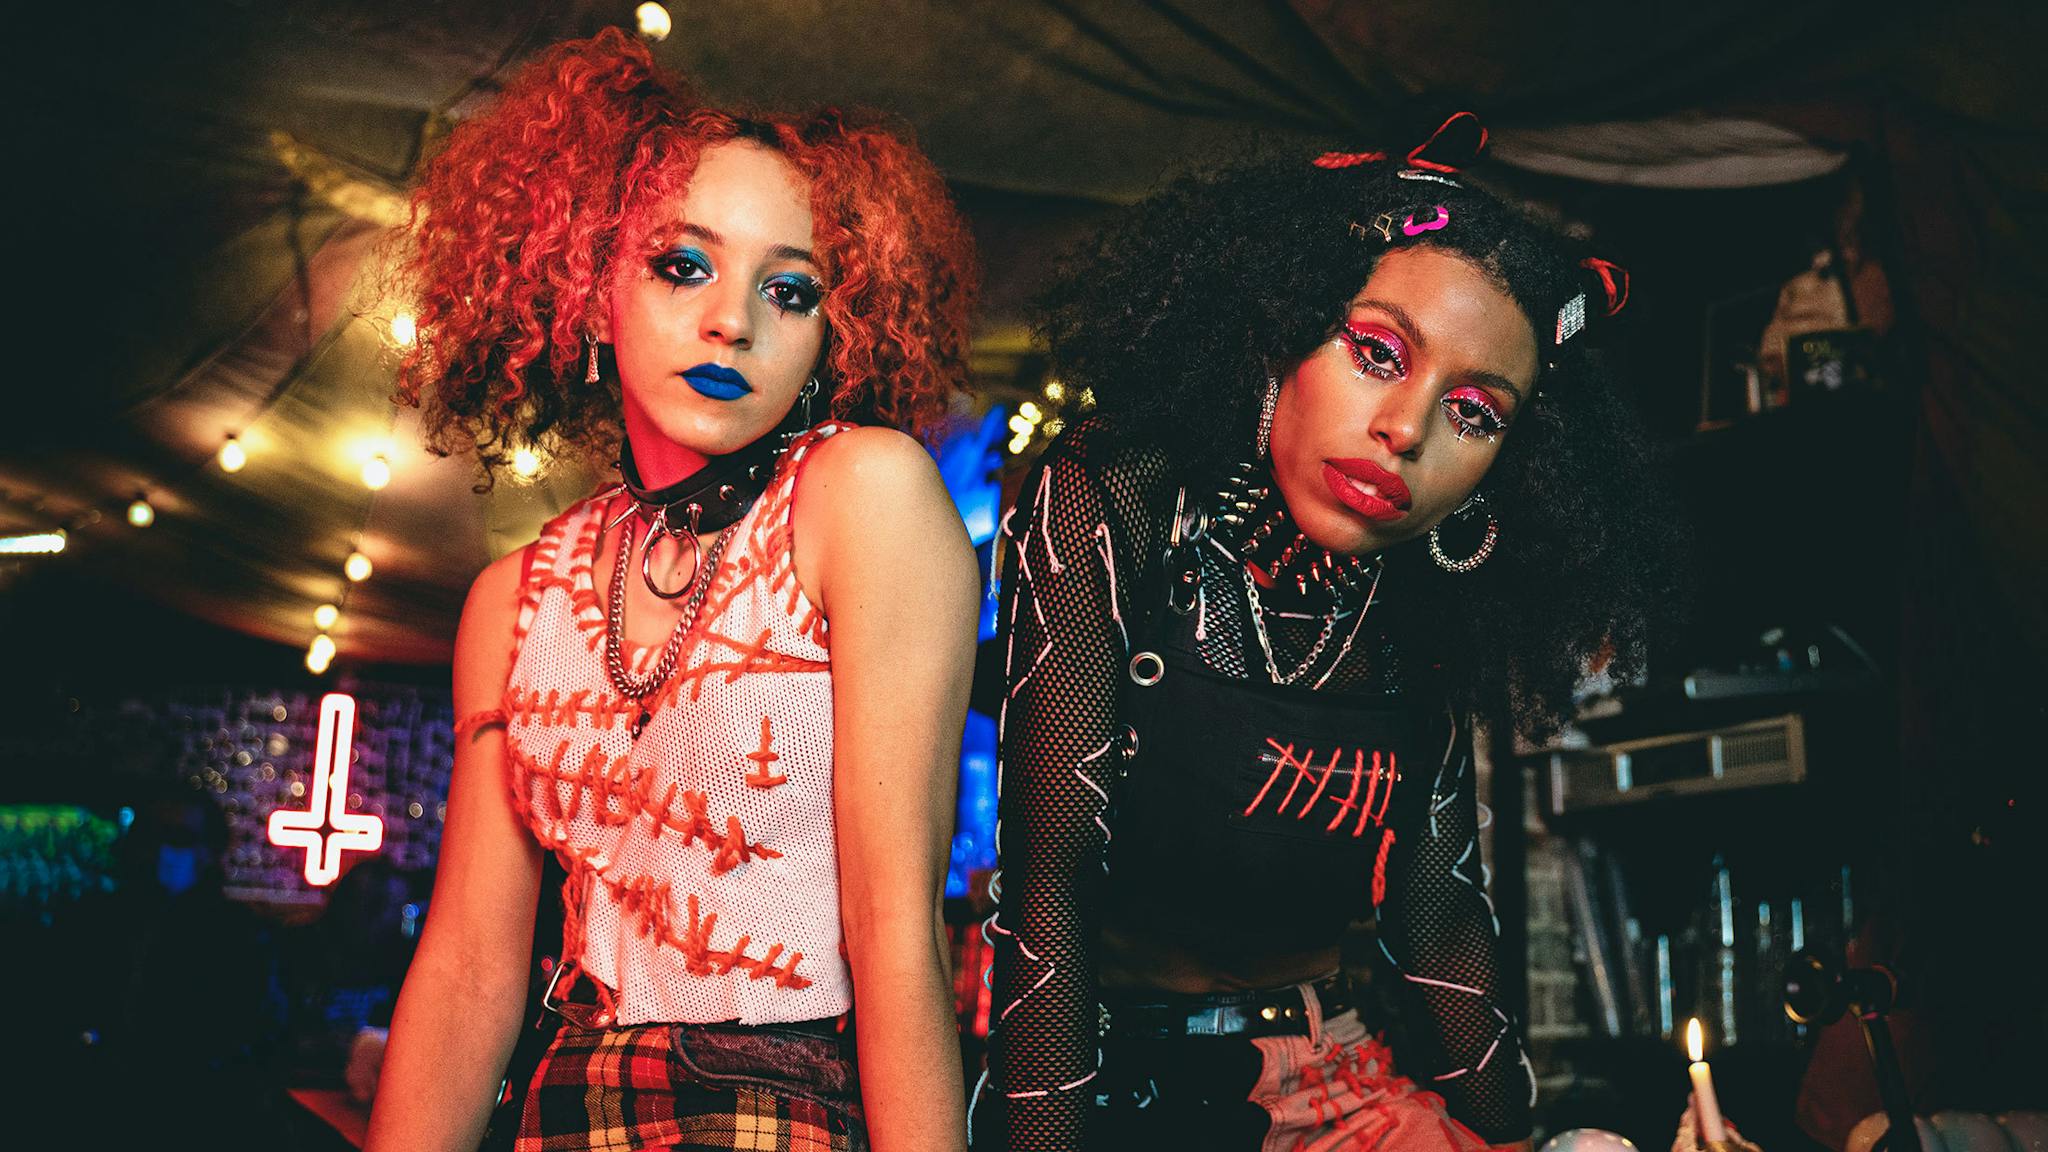 Why Nova Twins wrote an open letter to the MOBOs | Kerrang!